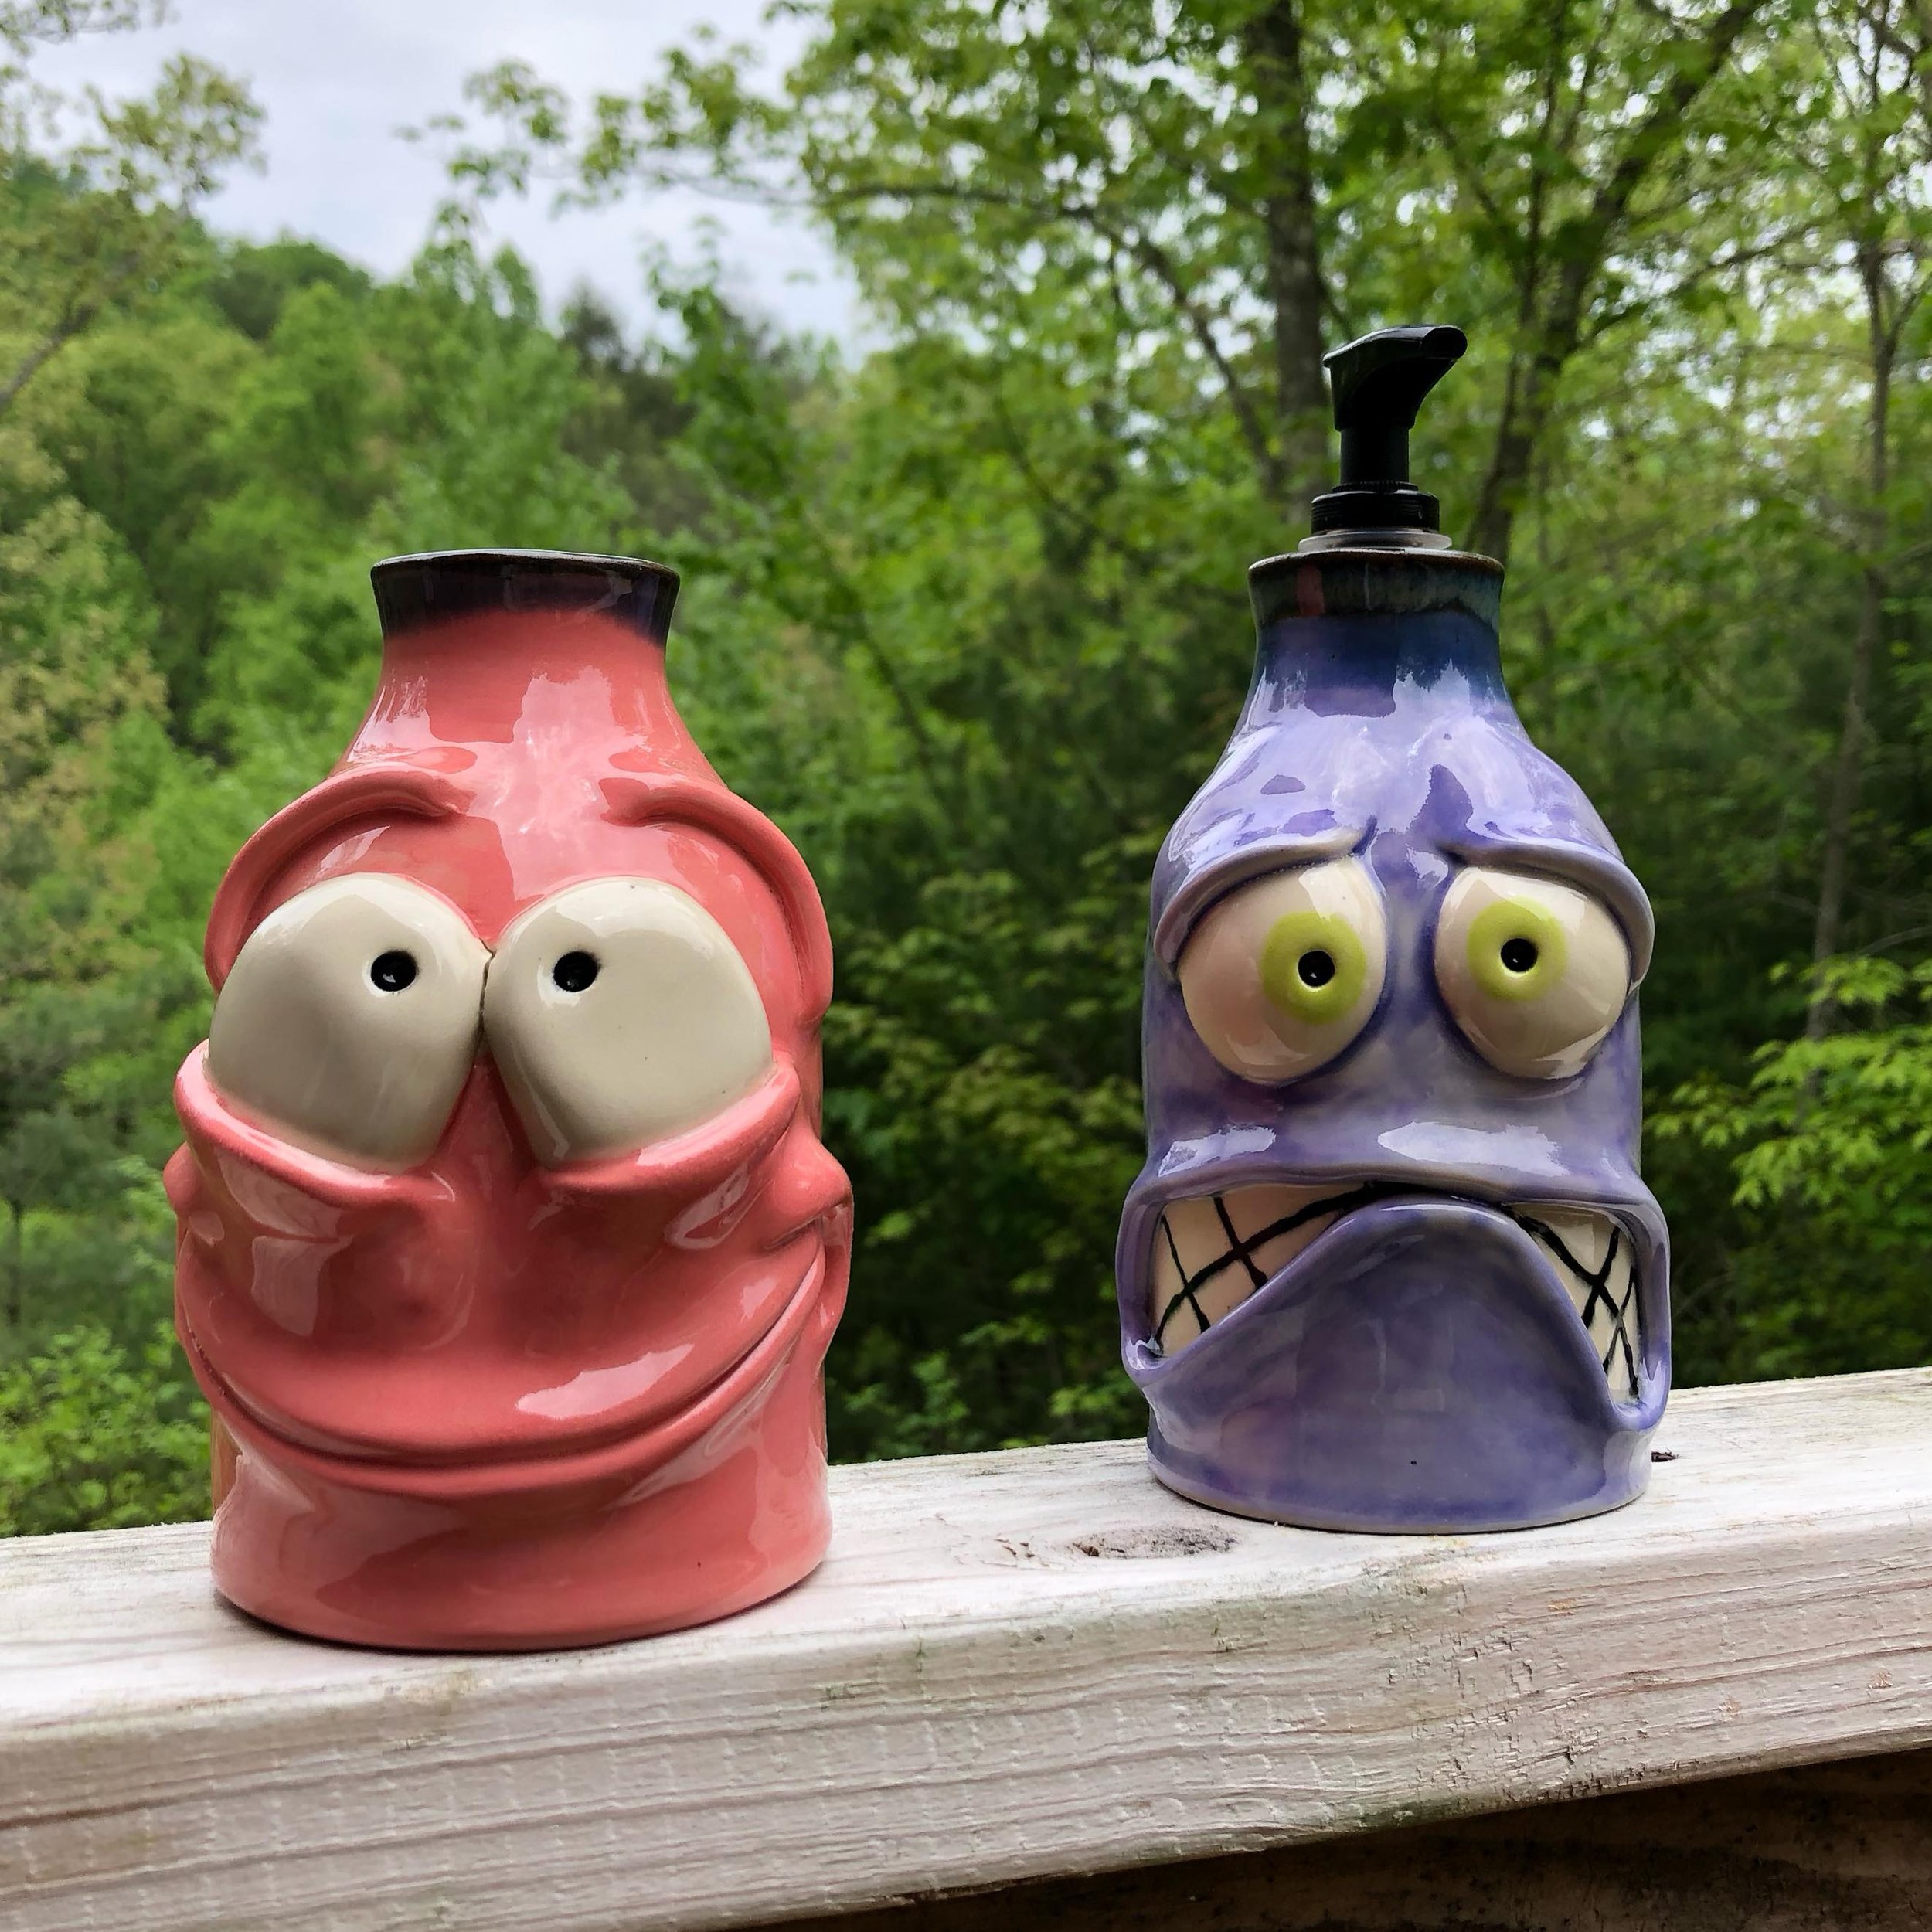 Two bottle vases prepped and ready to go! 

Come see them at the Spring Southern Pottery Show in Gillsville on May 11th!